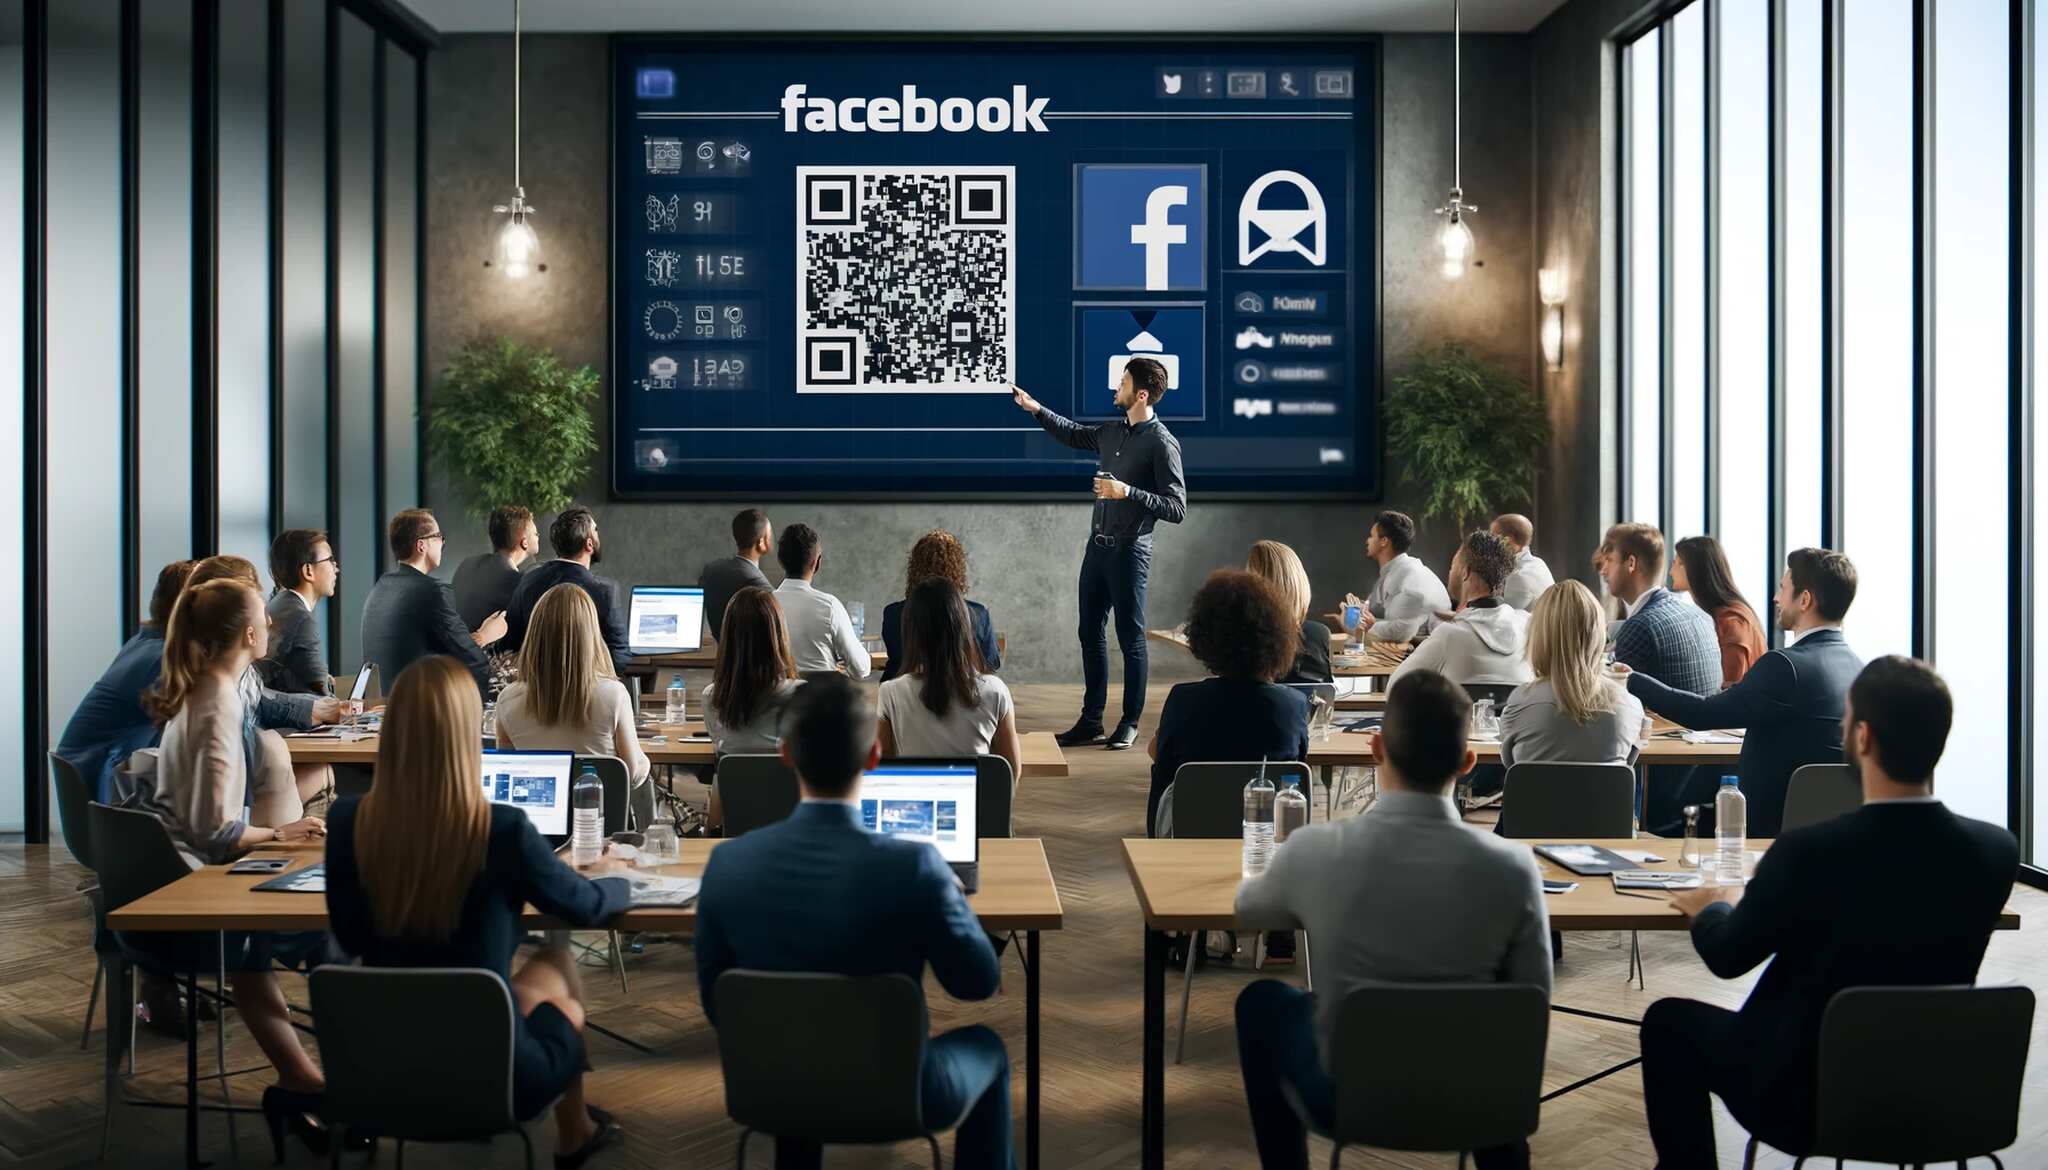 a man showing a QR code on a big screen with a Facebook logo